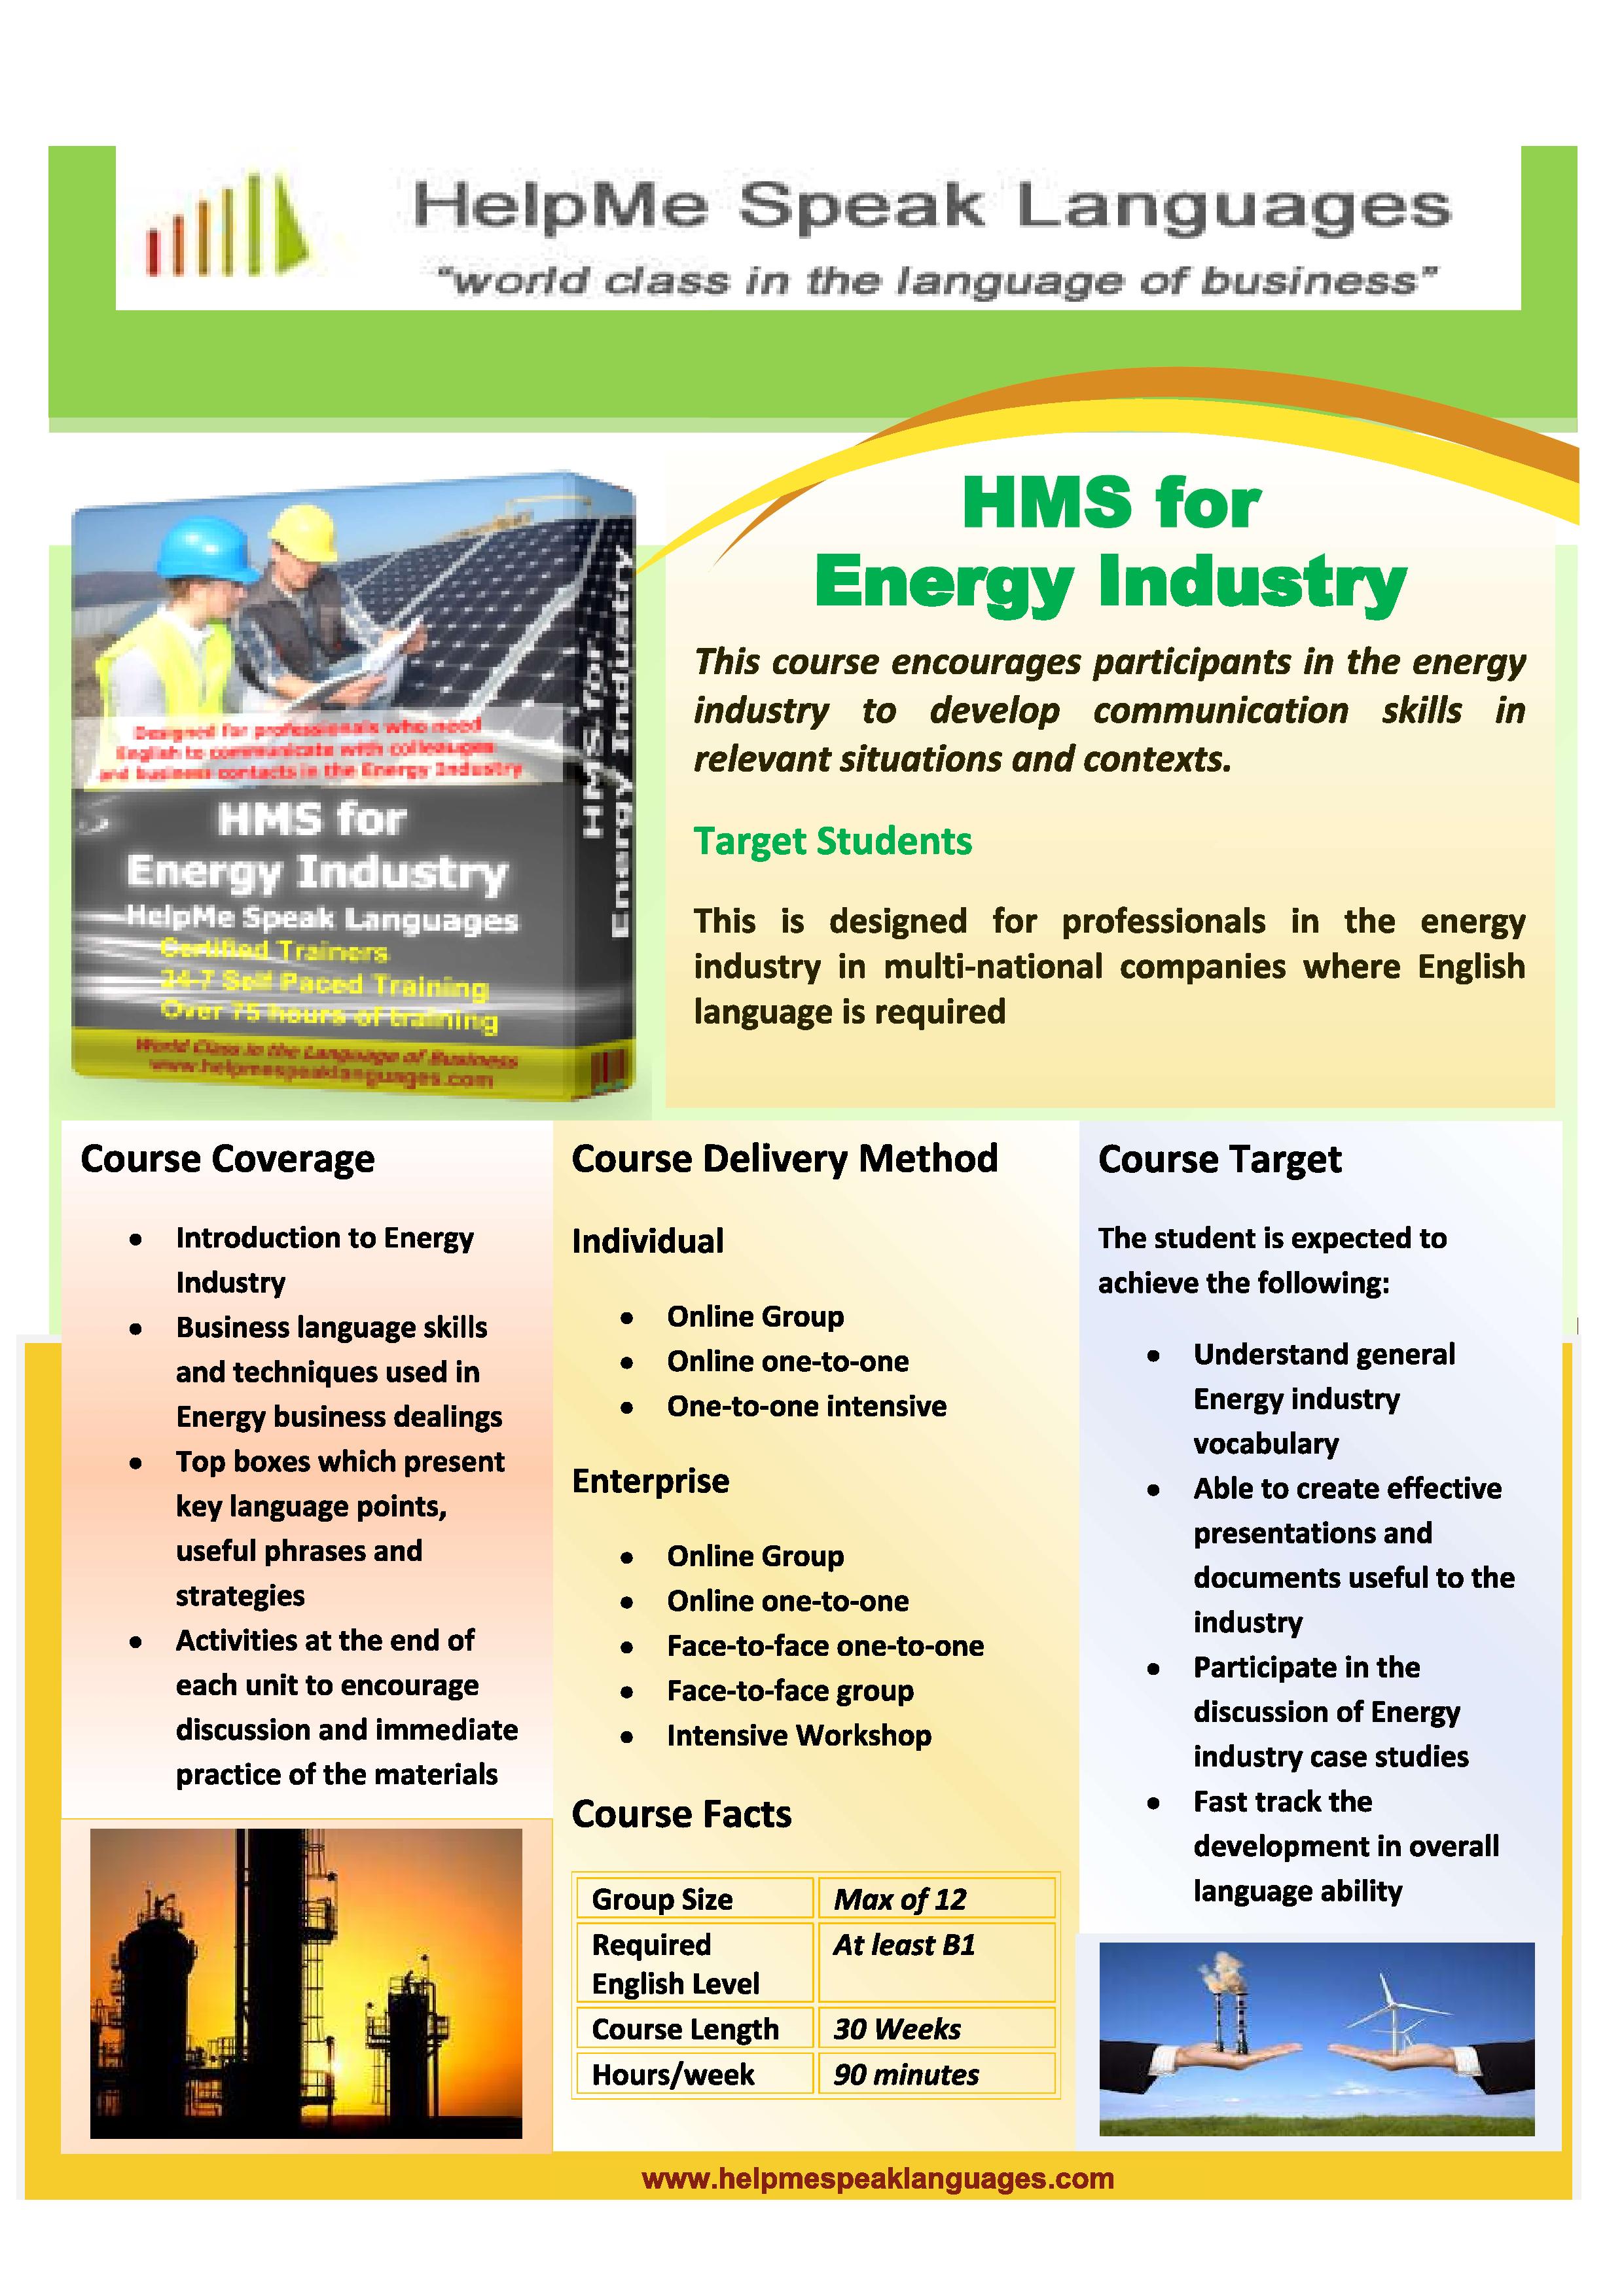 hms-energy-industry-page-001